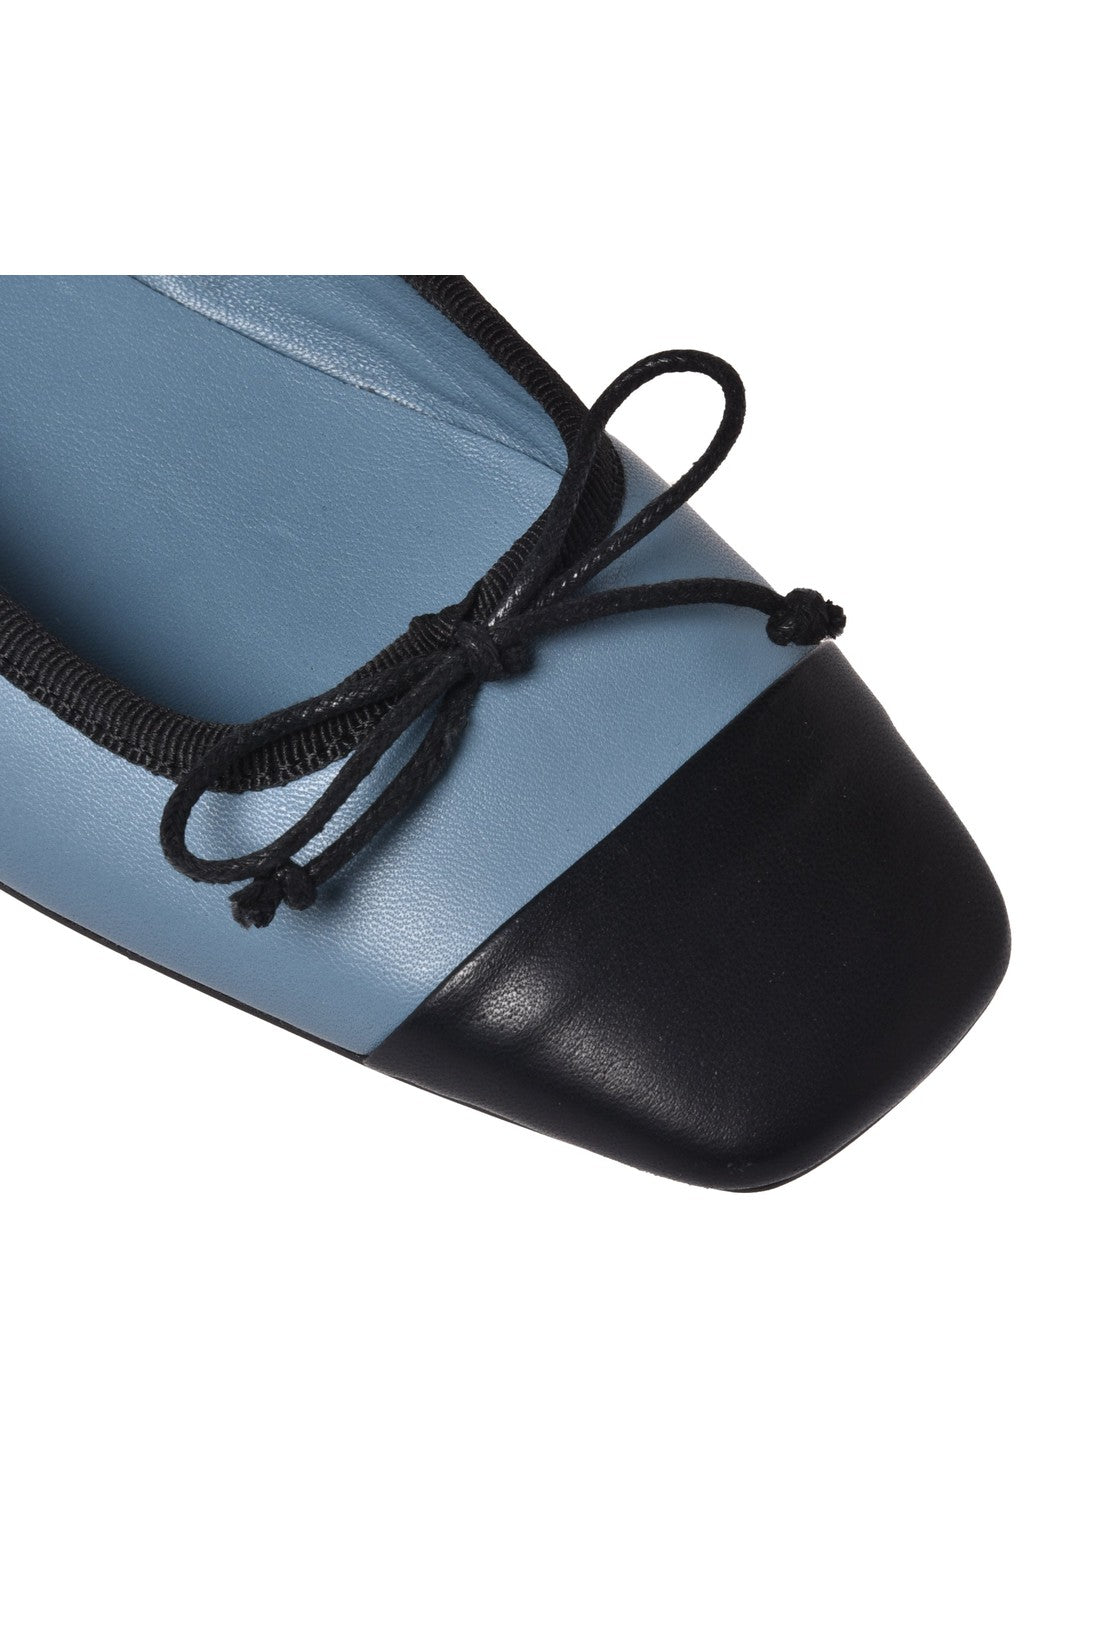 BALDININI-OUTLET-SALE-Ballerina-pump-in-black-and-blue-nappa-leather-Halbschuhe-ARCHIVE-COLLECTION-4_3a725d27-4681-4b3d-8f91-c0390a939019.jpg